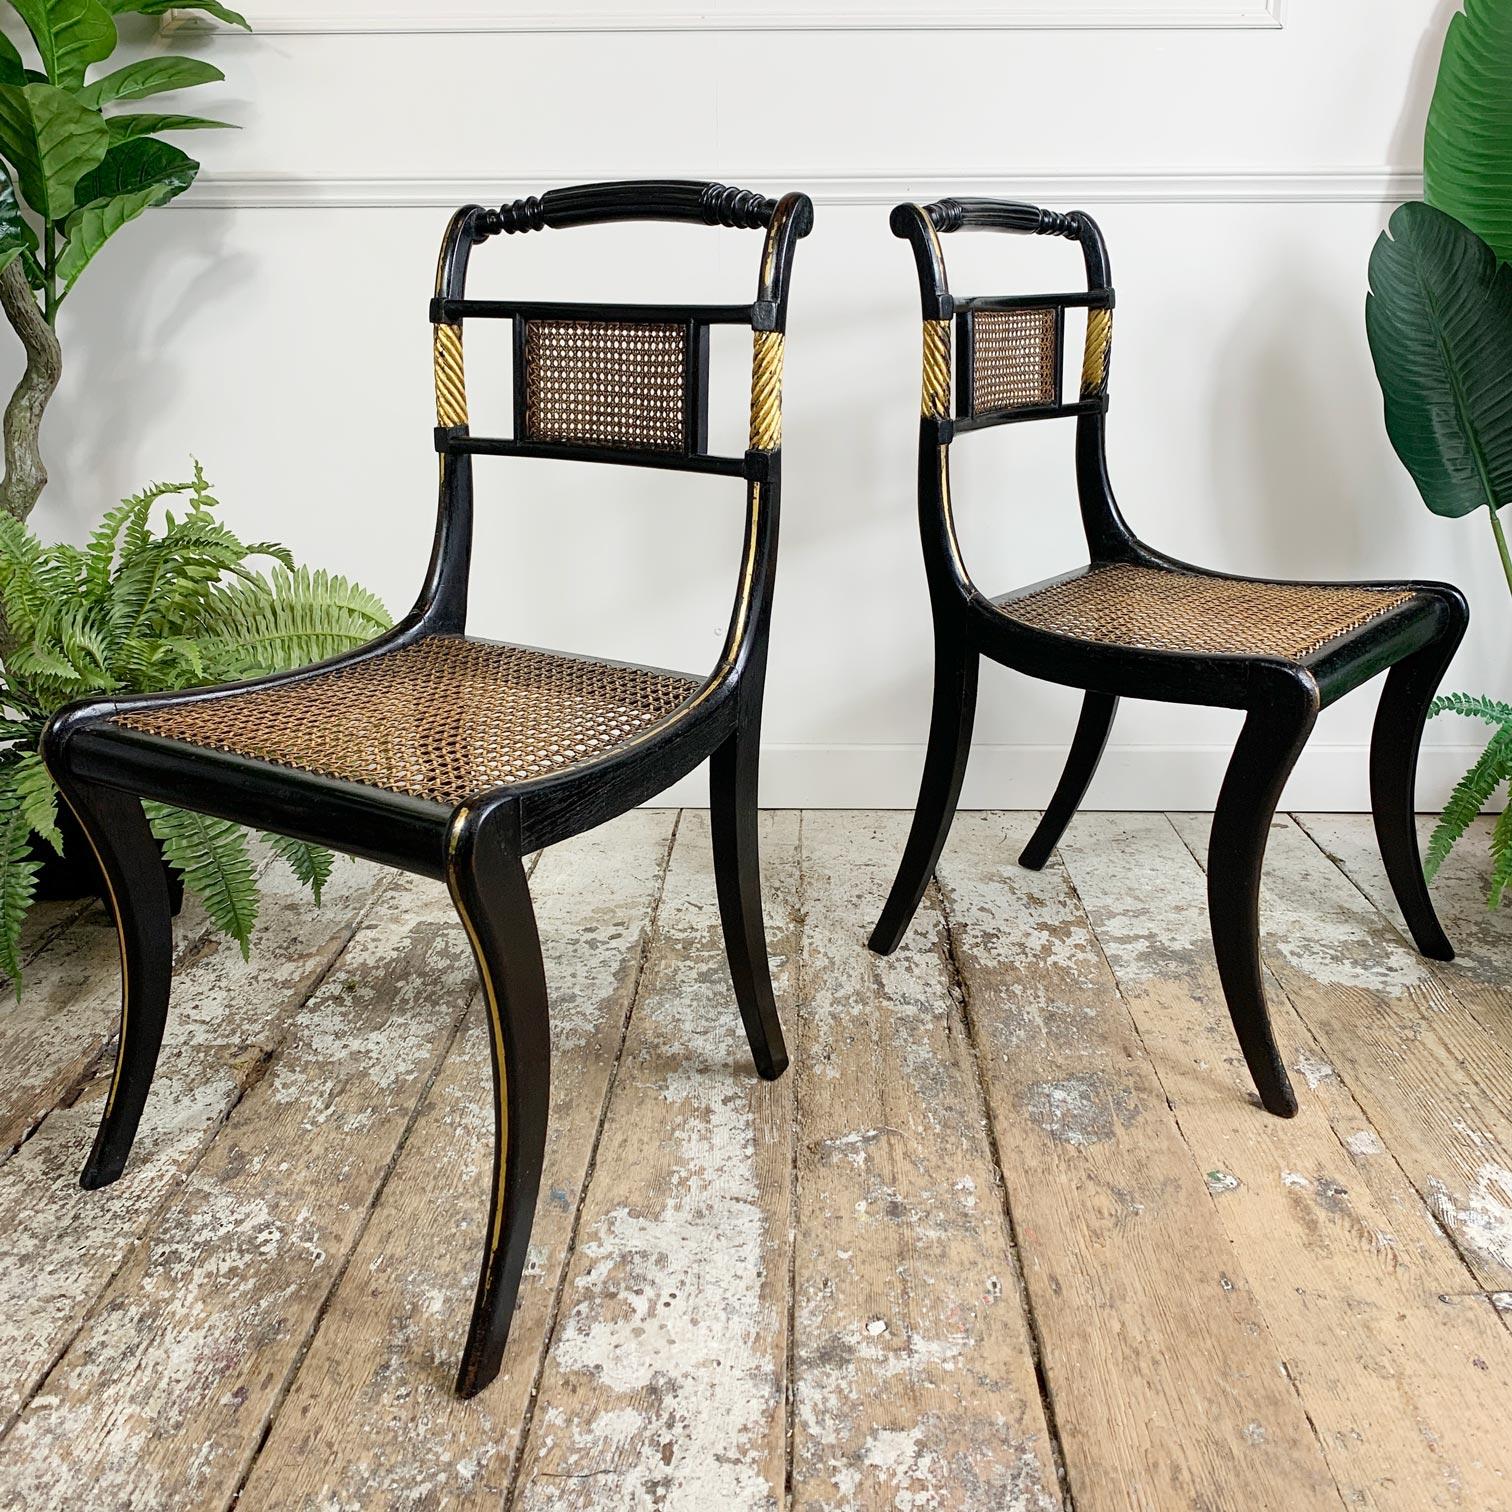 A stunning pair of Egyptian revival Regency chairs, circa 1820. The seats have been professionally re-caned, the central cane panels on the backrest are original. Wonderfully shaped and turned top rails compliment the sweeping formed legs, these are